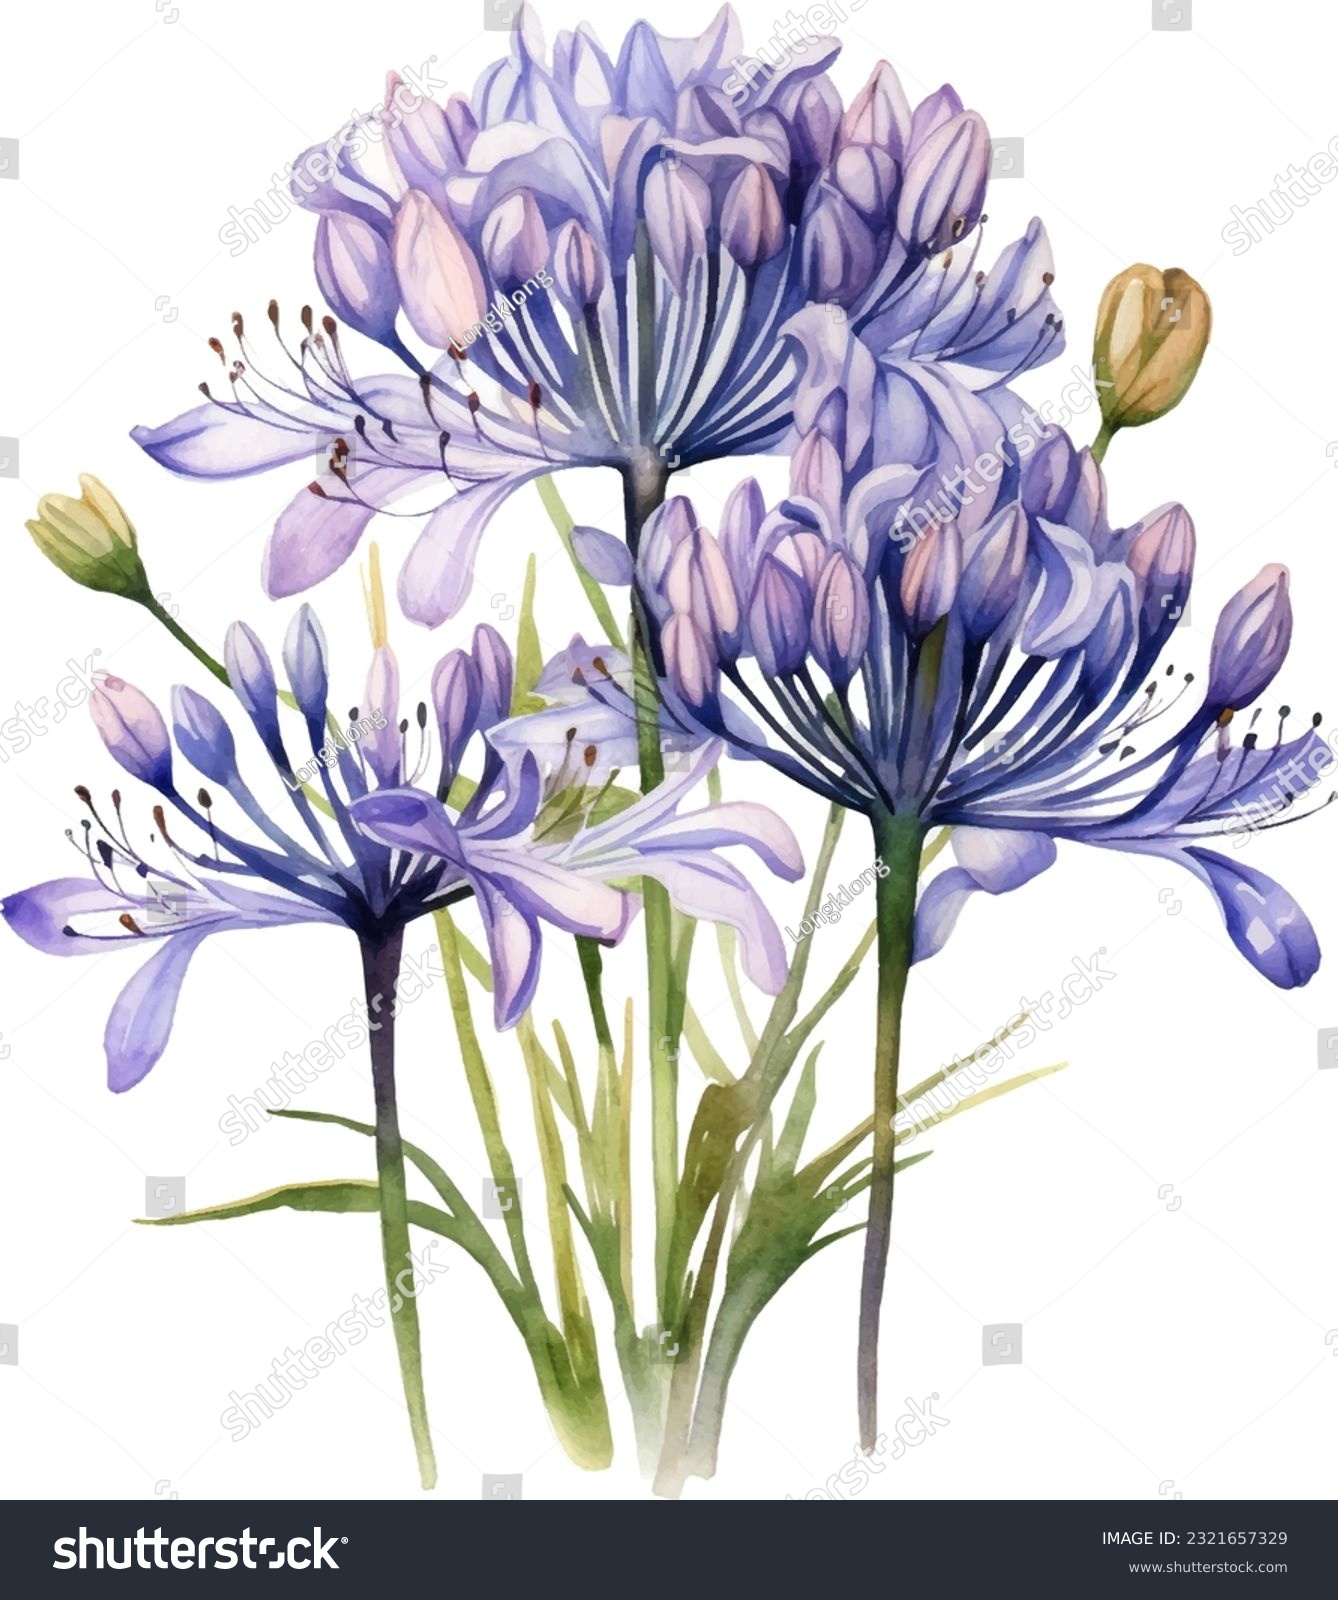 SVG of Agapanthus Watercolor illustration. Hand drawn underwater element design. Artistic vector marine design element. Illustration for greeting cards, printing and other design projects. svg